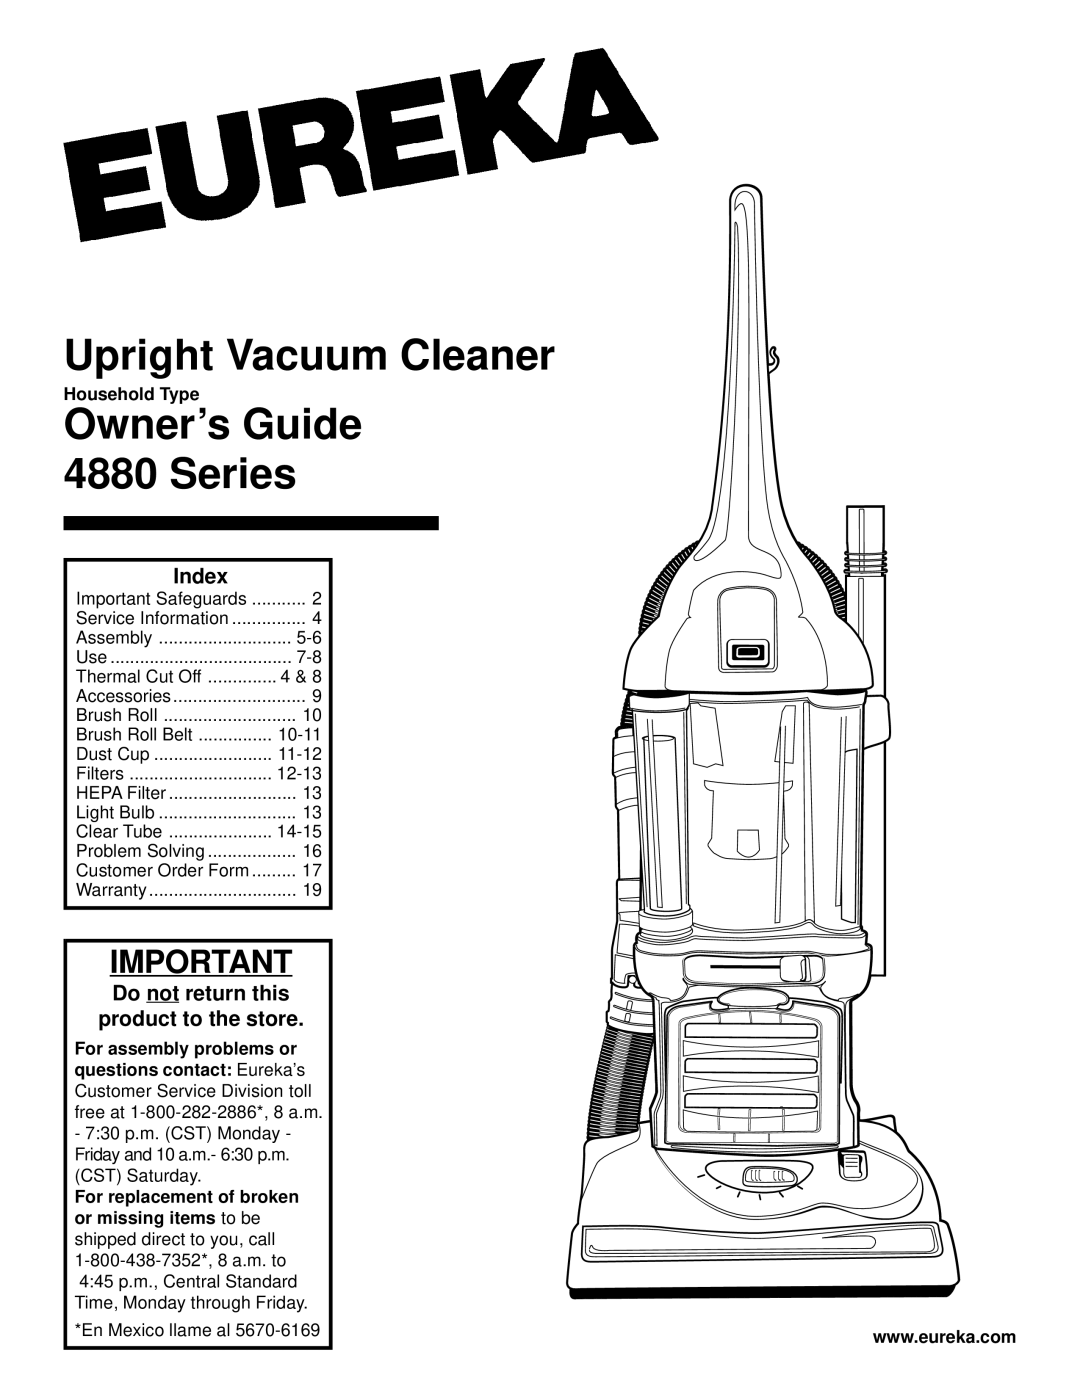 Eureka 4880 warranty Household Type, For assembly problems or Questions contact Eureka’s 